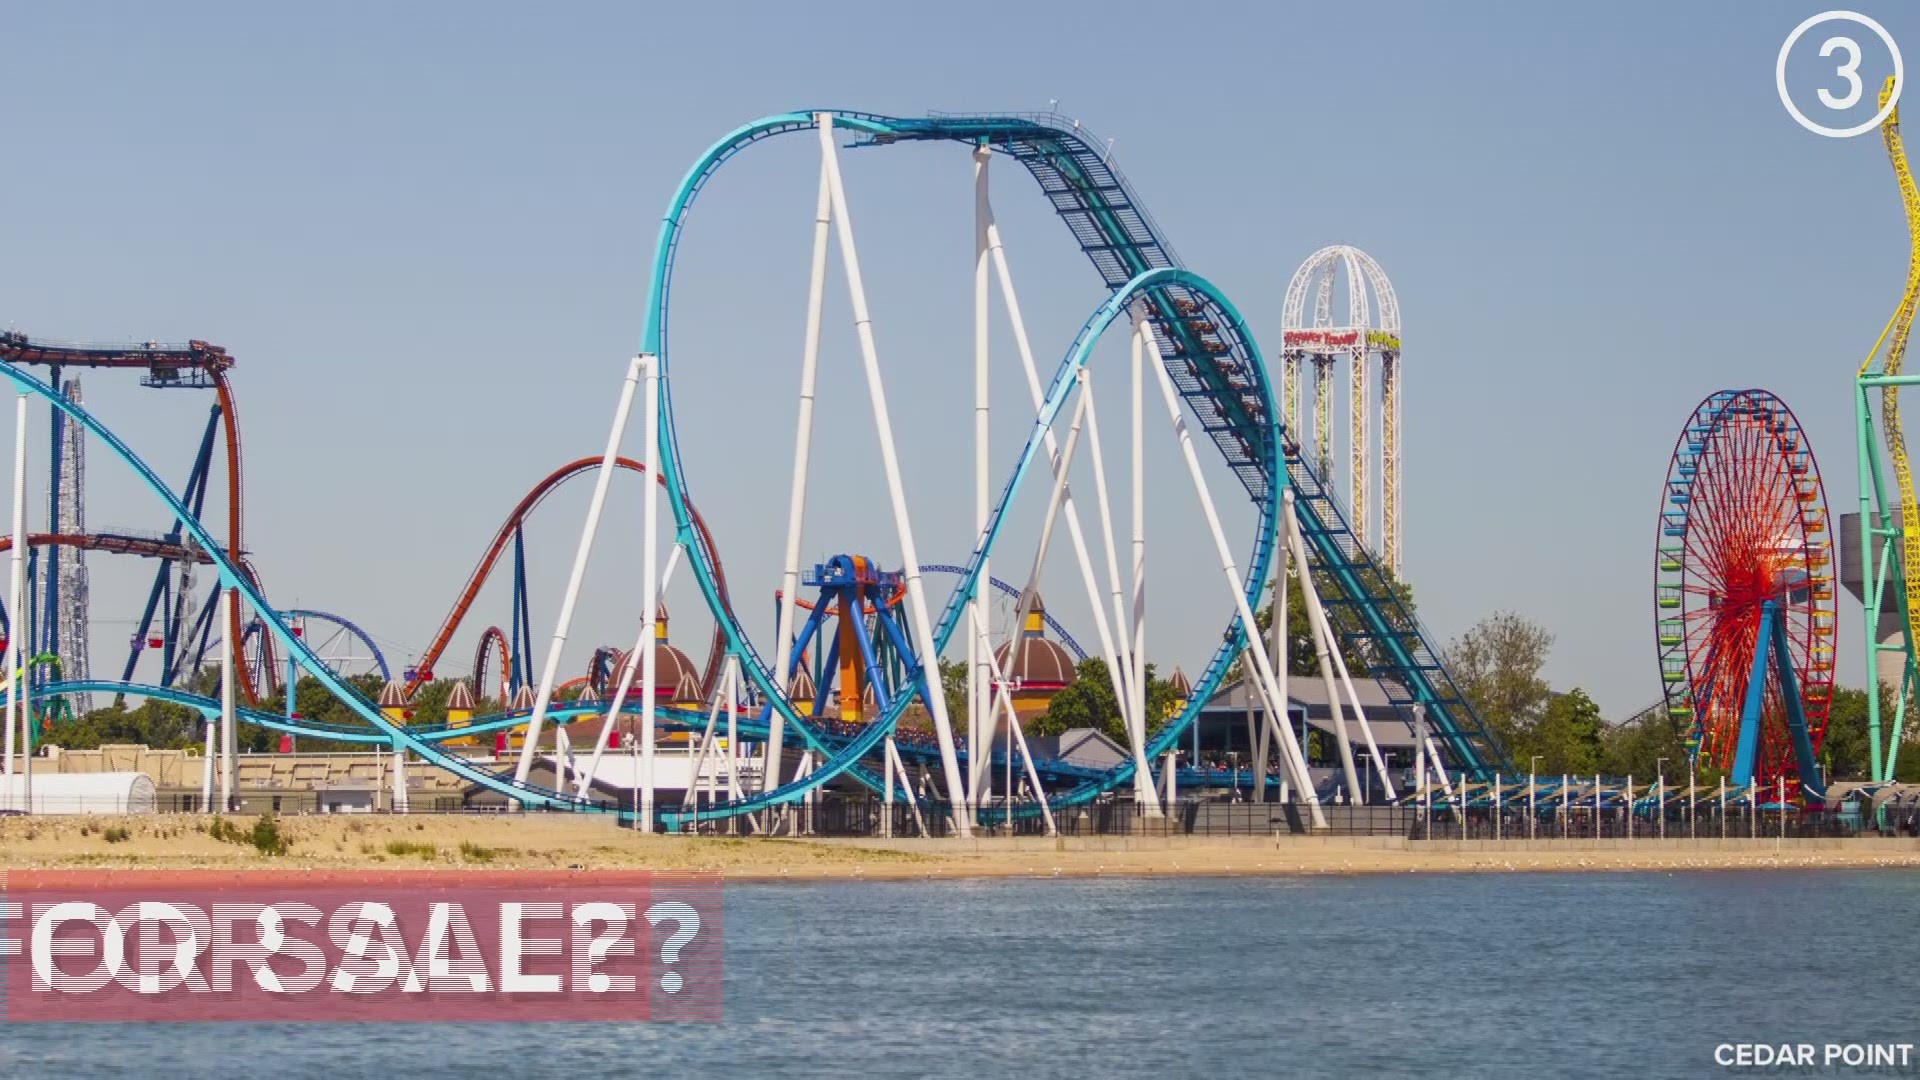 The report from Reuters said Six Flags approached Cedar Fair with a 'merger offer.'